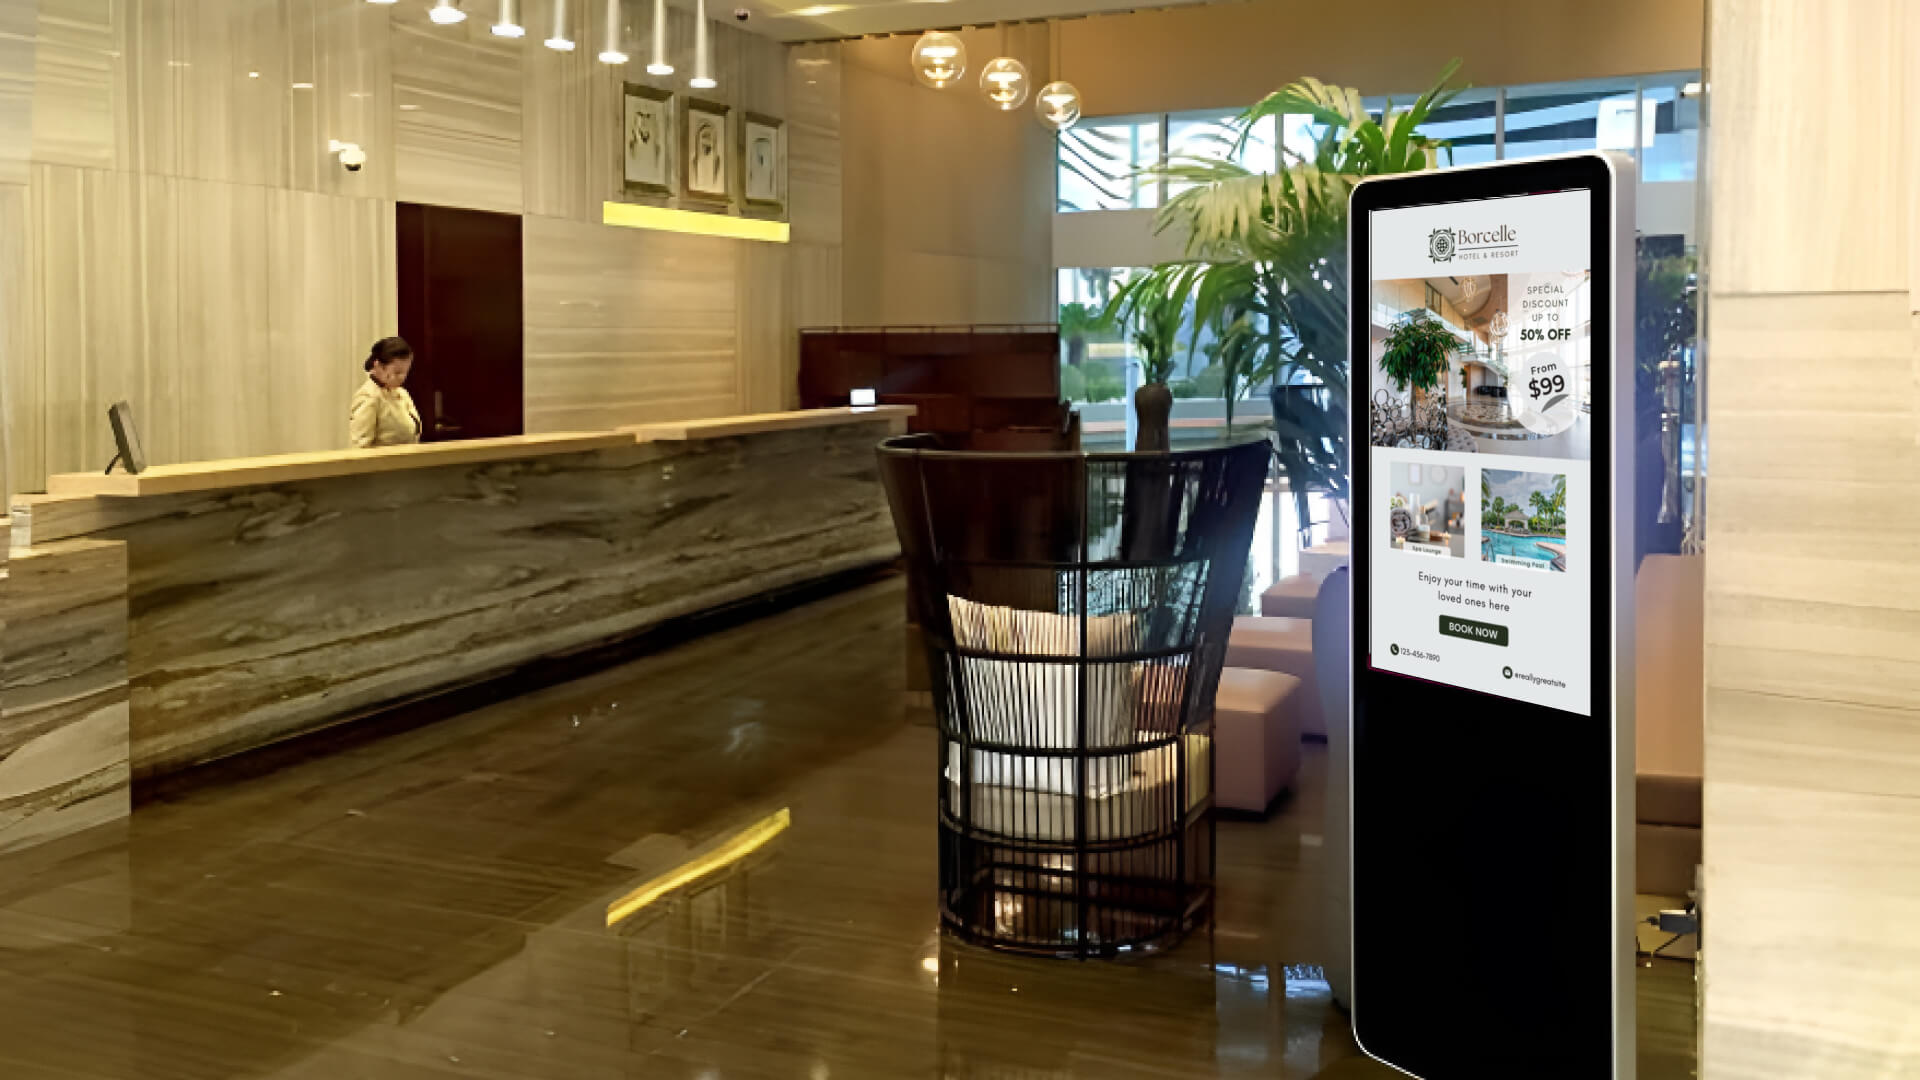 A hotel reception with a digital signage screen kiosk running hotel promotions and events.